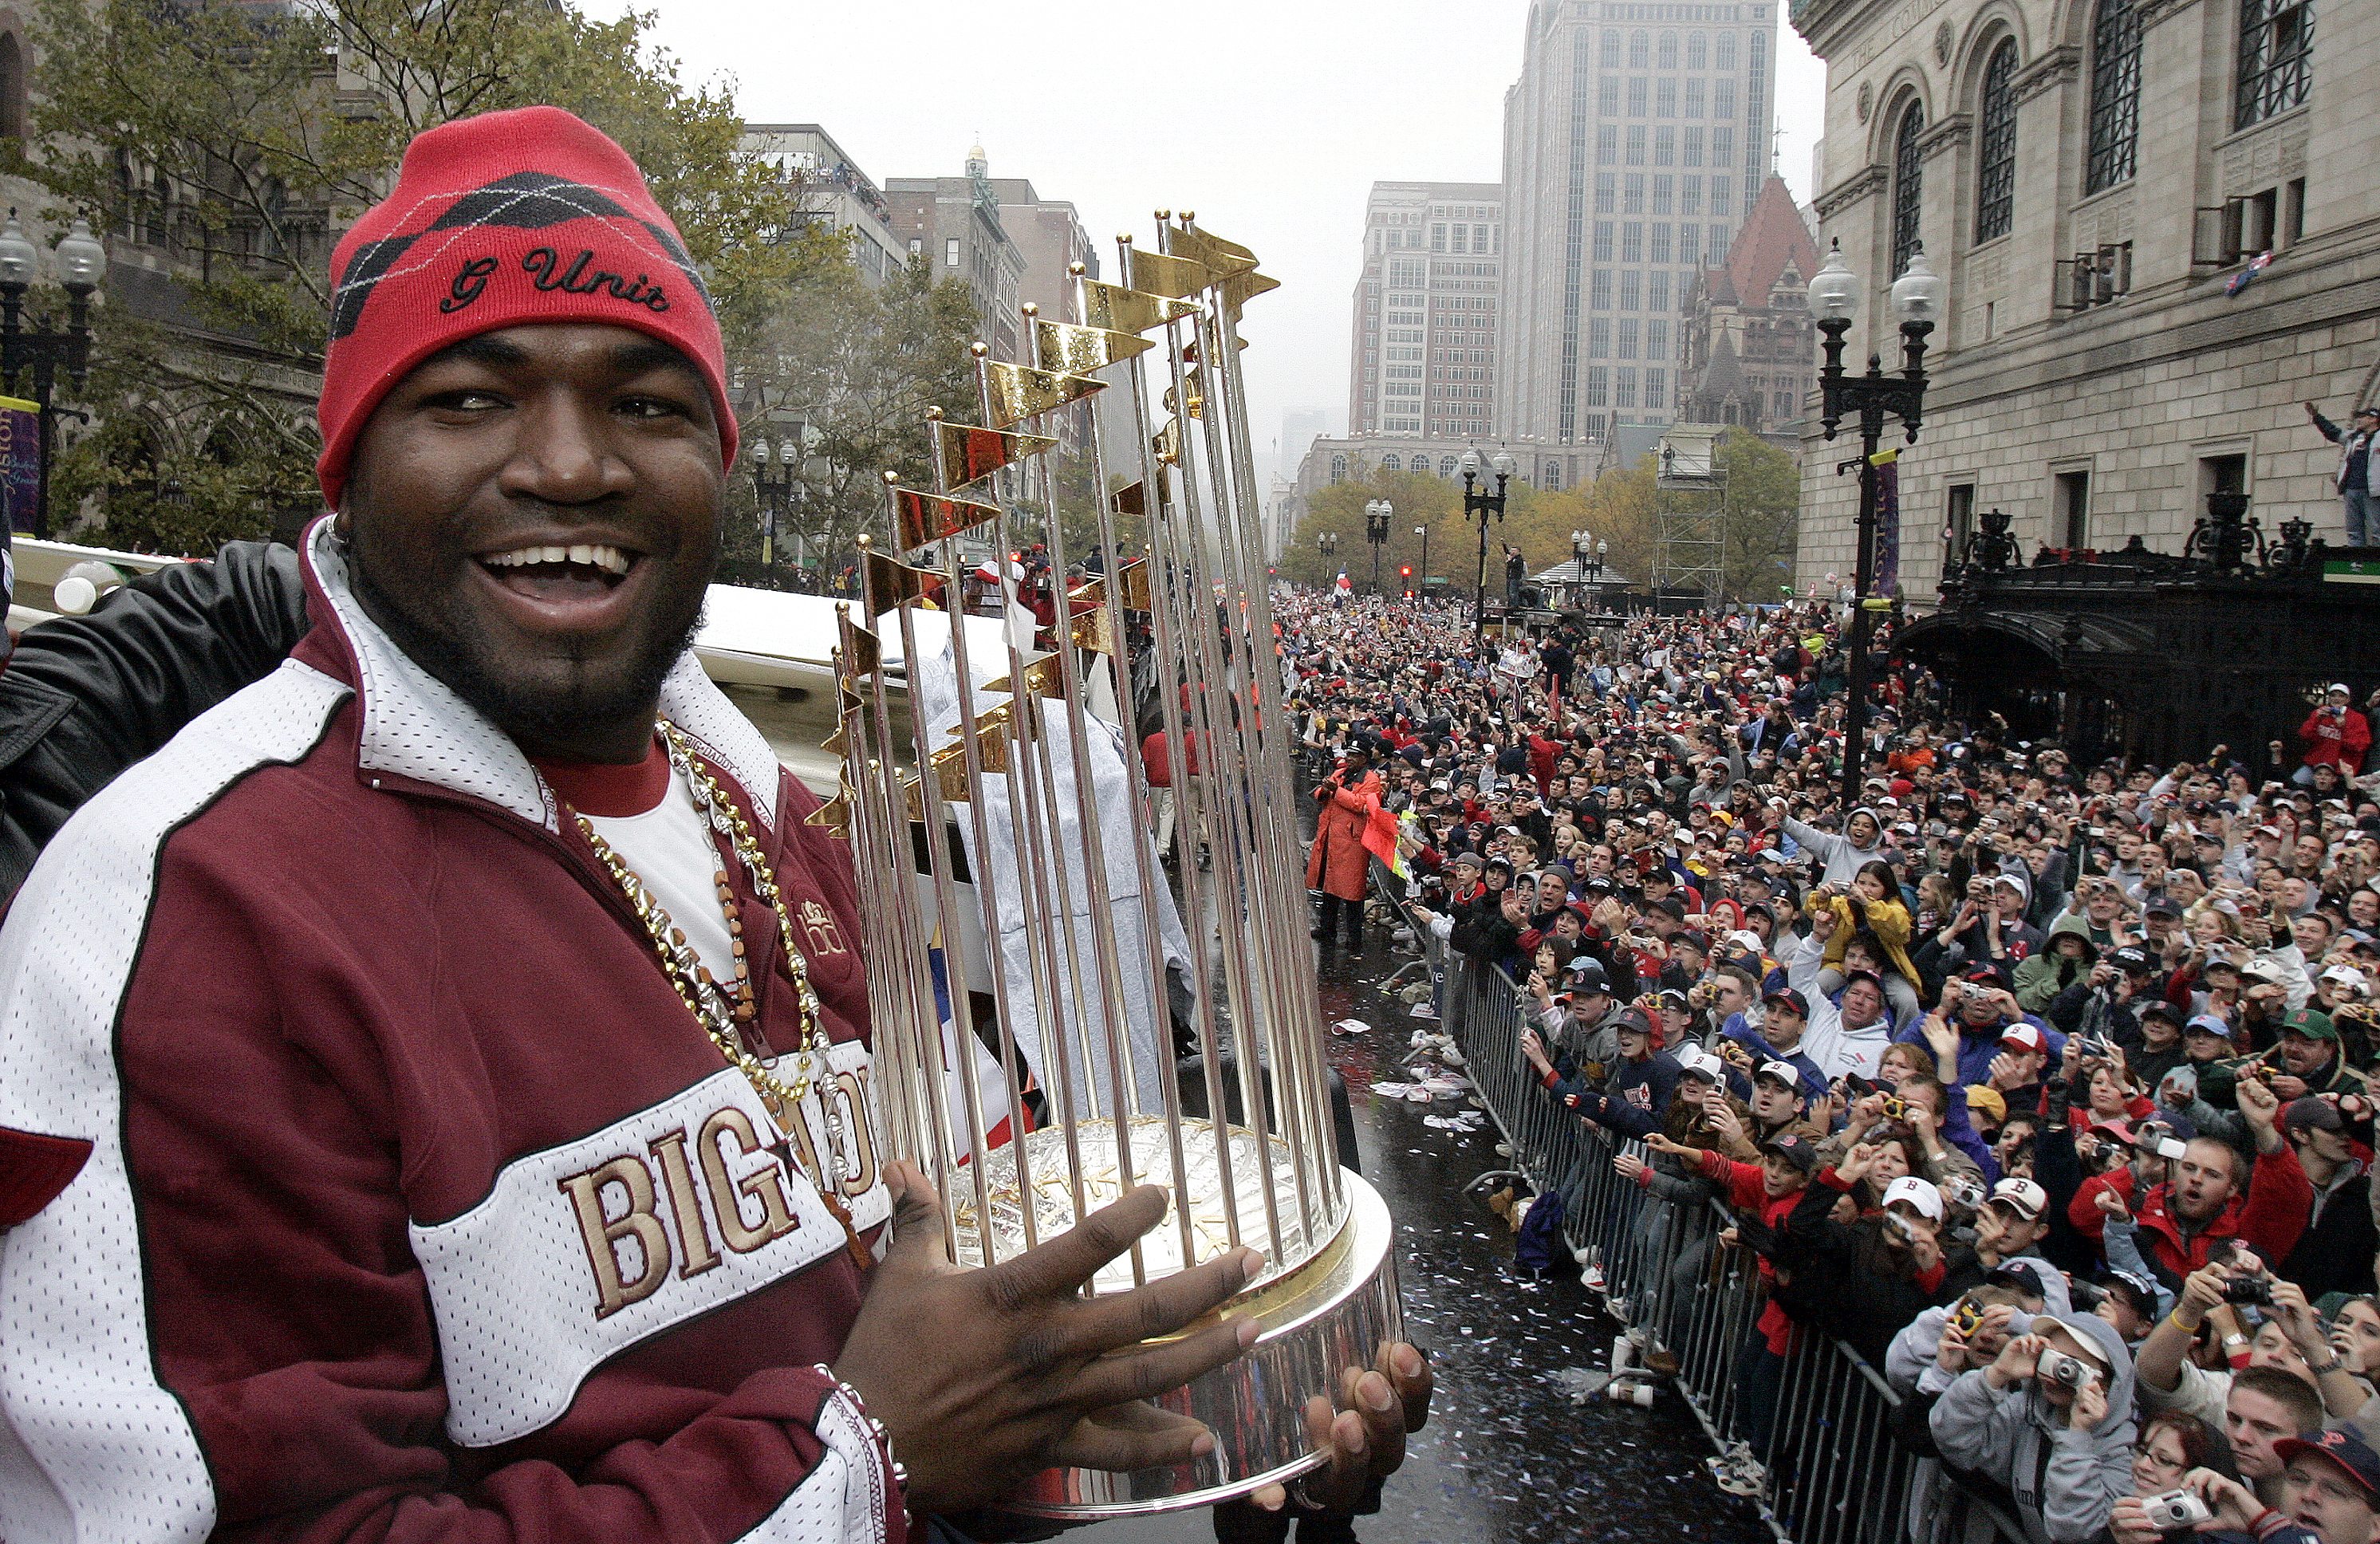 Fans are packed like sardines on Boylston Street to catch a glimpse of Ortiz and the World Series trophy during the Red Sox' rolling parade on Oct. 30, 2004, to celebrate breaking the 86-year-drought. 